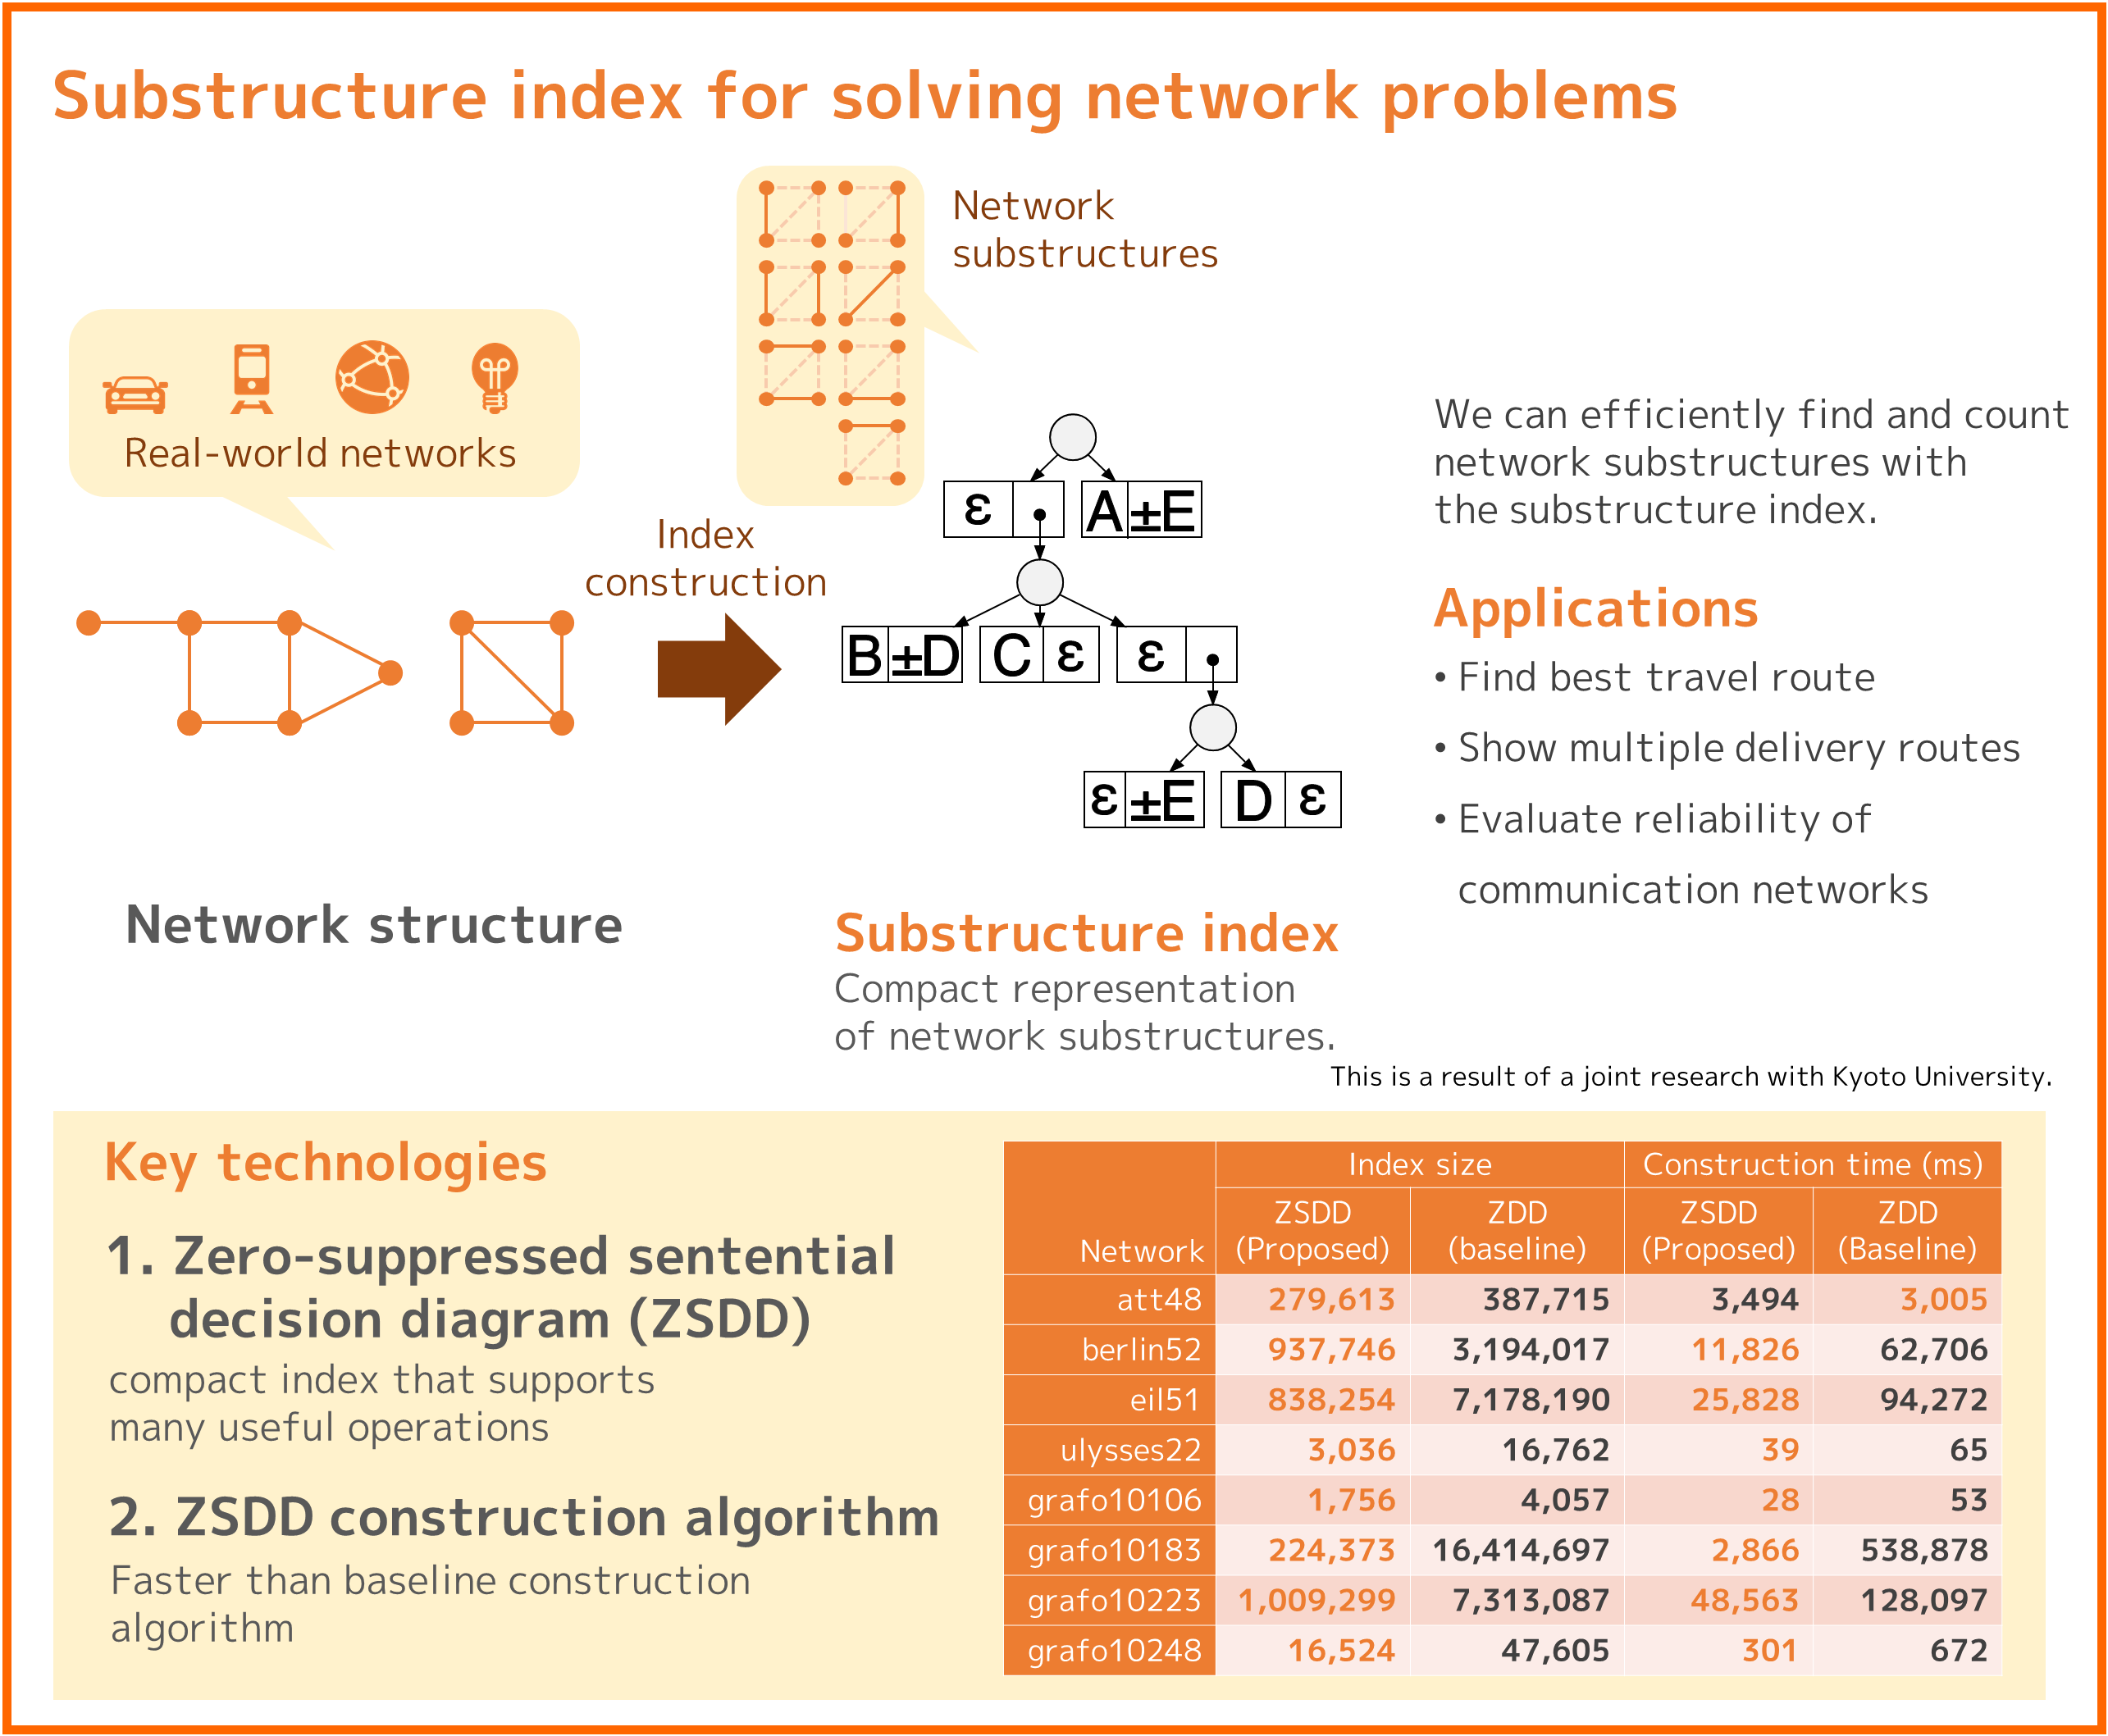 Ask me anything about network structure